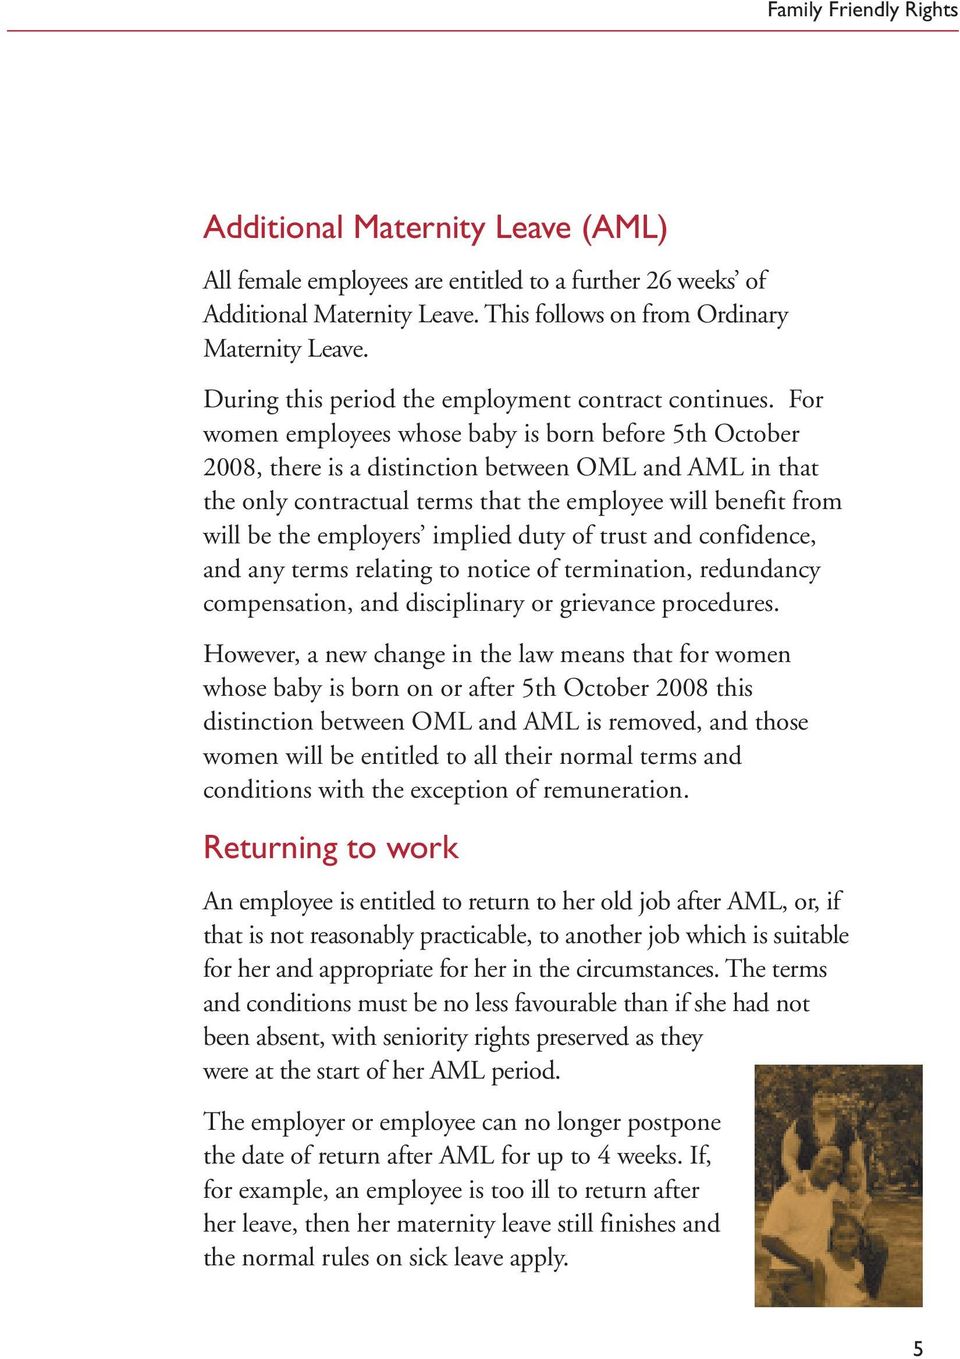 For women employees whose baby is born before 5th October 2008, there is a distinction between OML and AML in that the only contractual terms that the employee will benefit from will be the employers